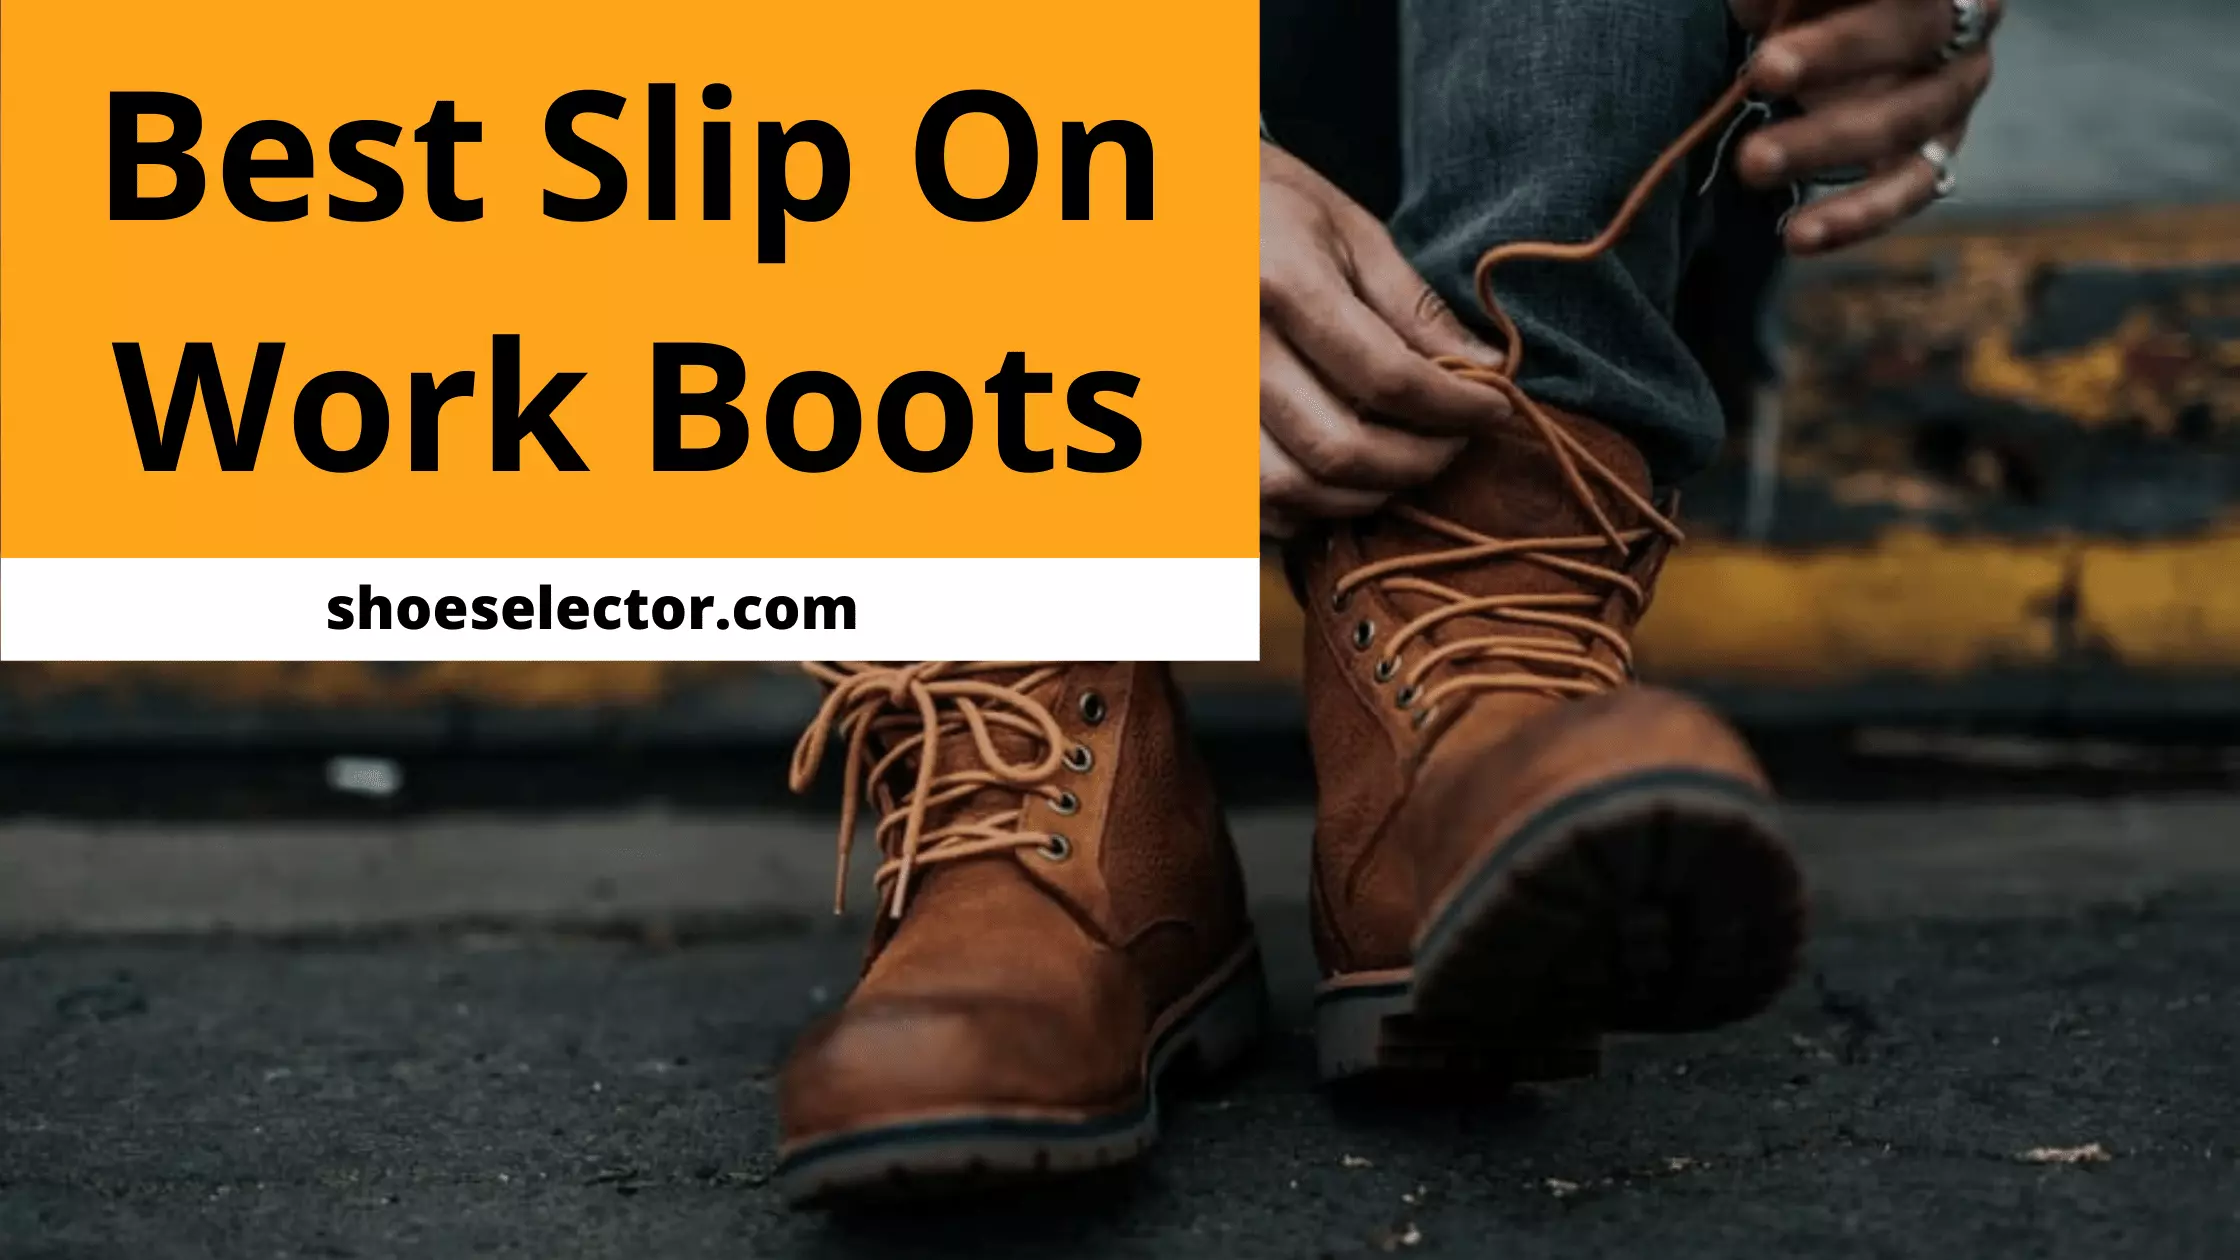 Best Slip On Work Boots - Most Comfortable Shoes